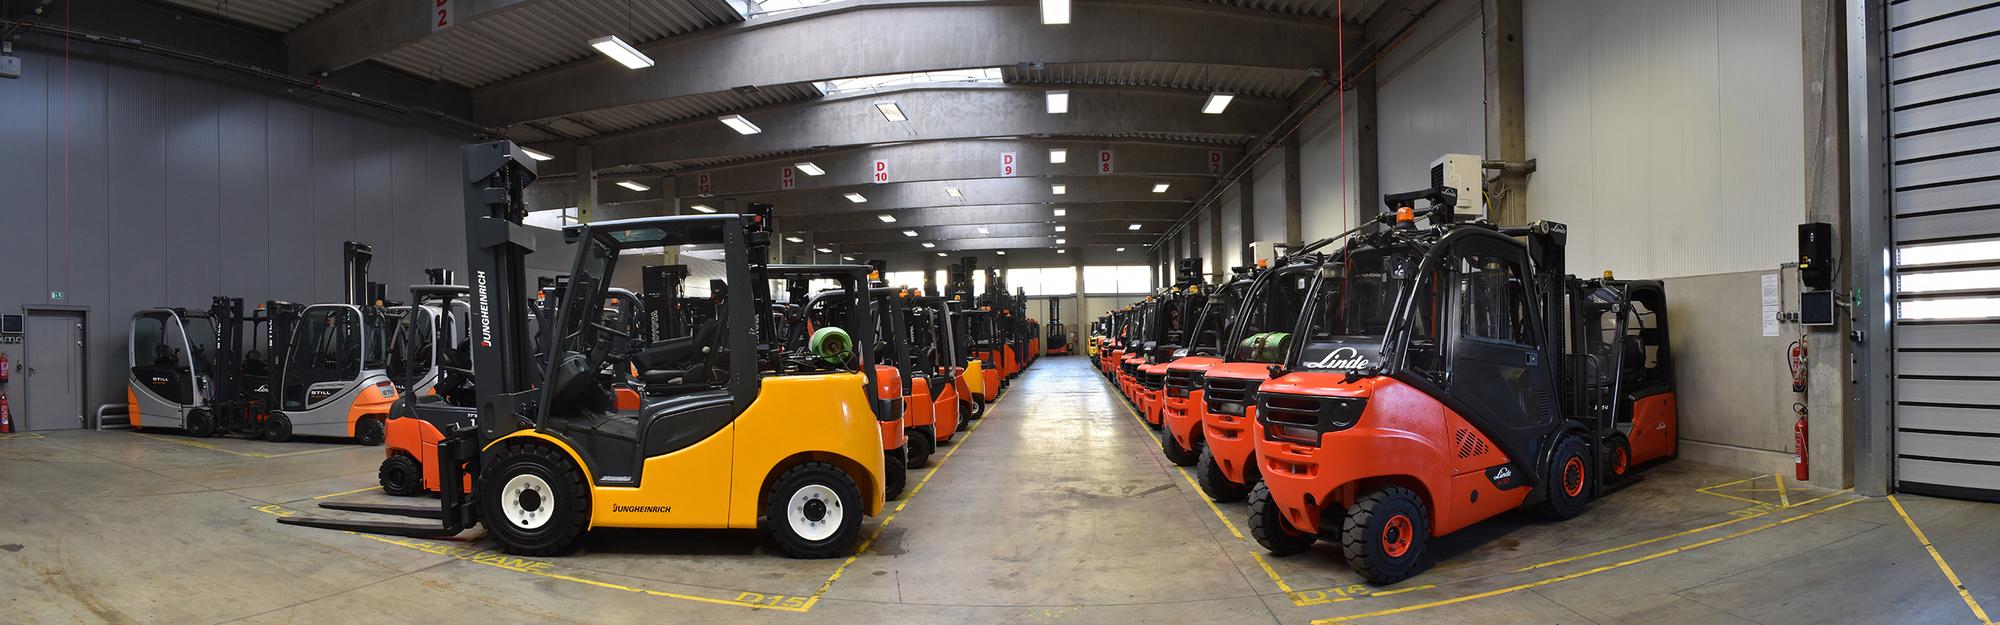 CHUF – cheap used forklifts undefined: photos 2